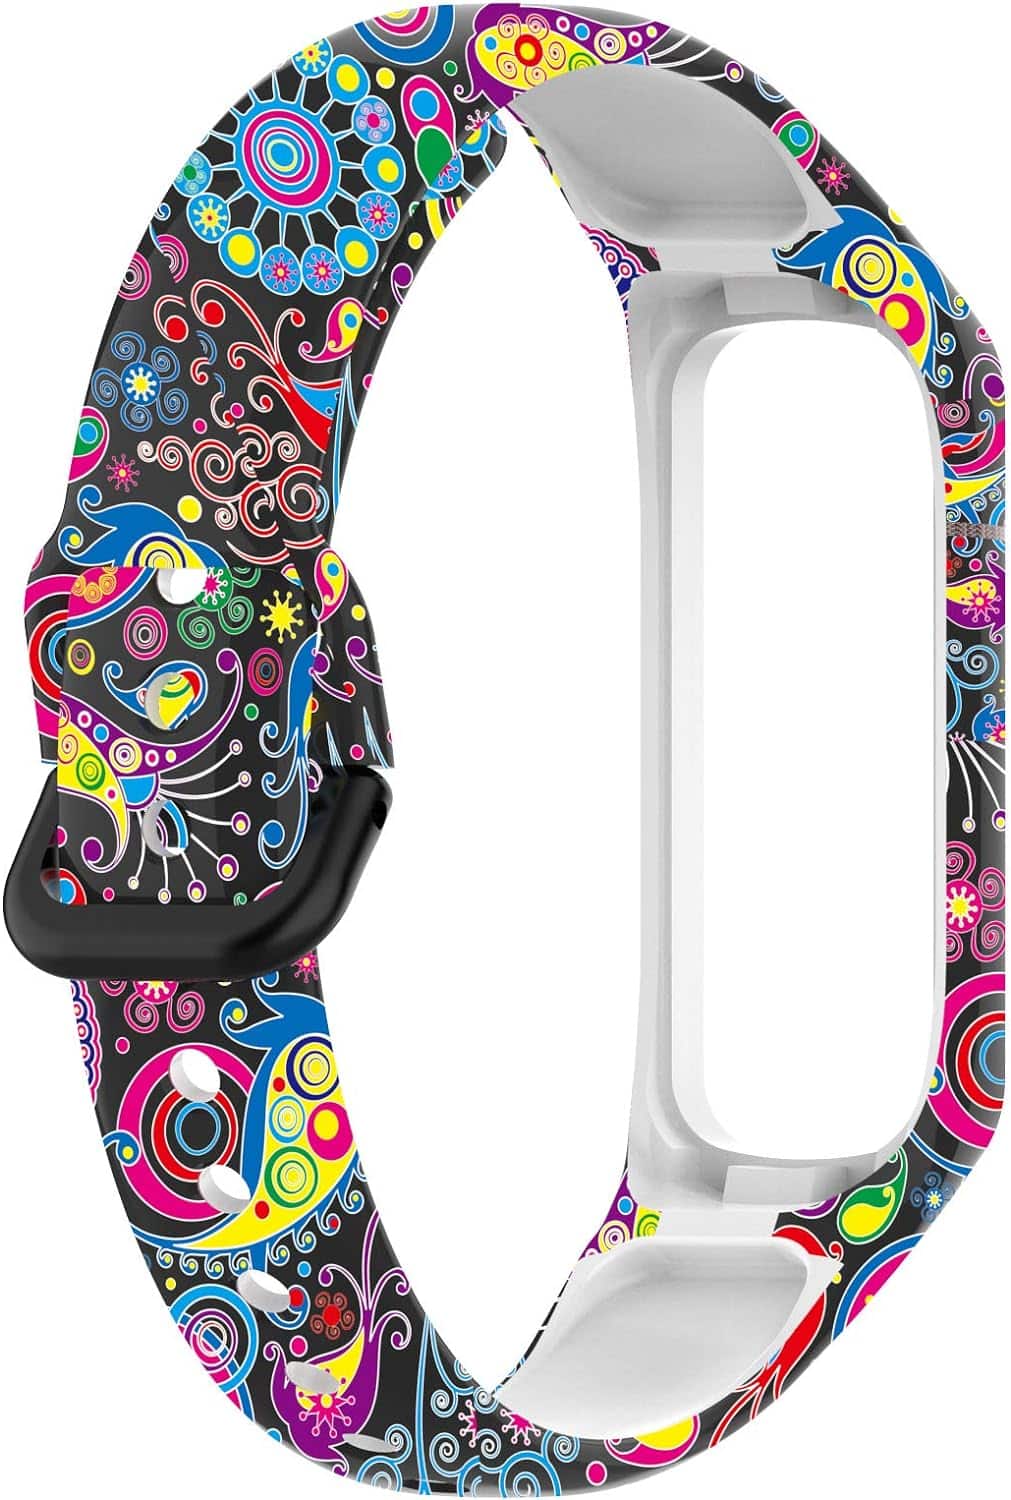 Enhance Your Style with Replacement Bands Compatible with Samsung Galaxy Fit2 SM-R220